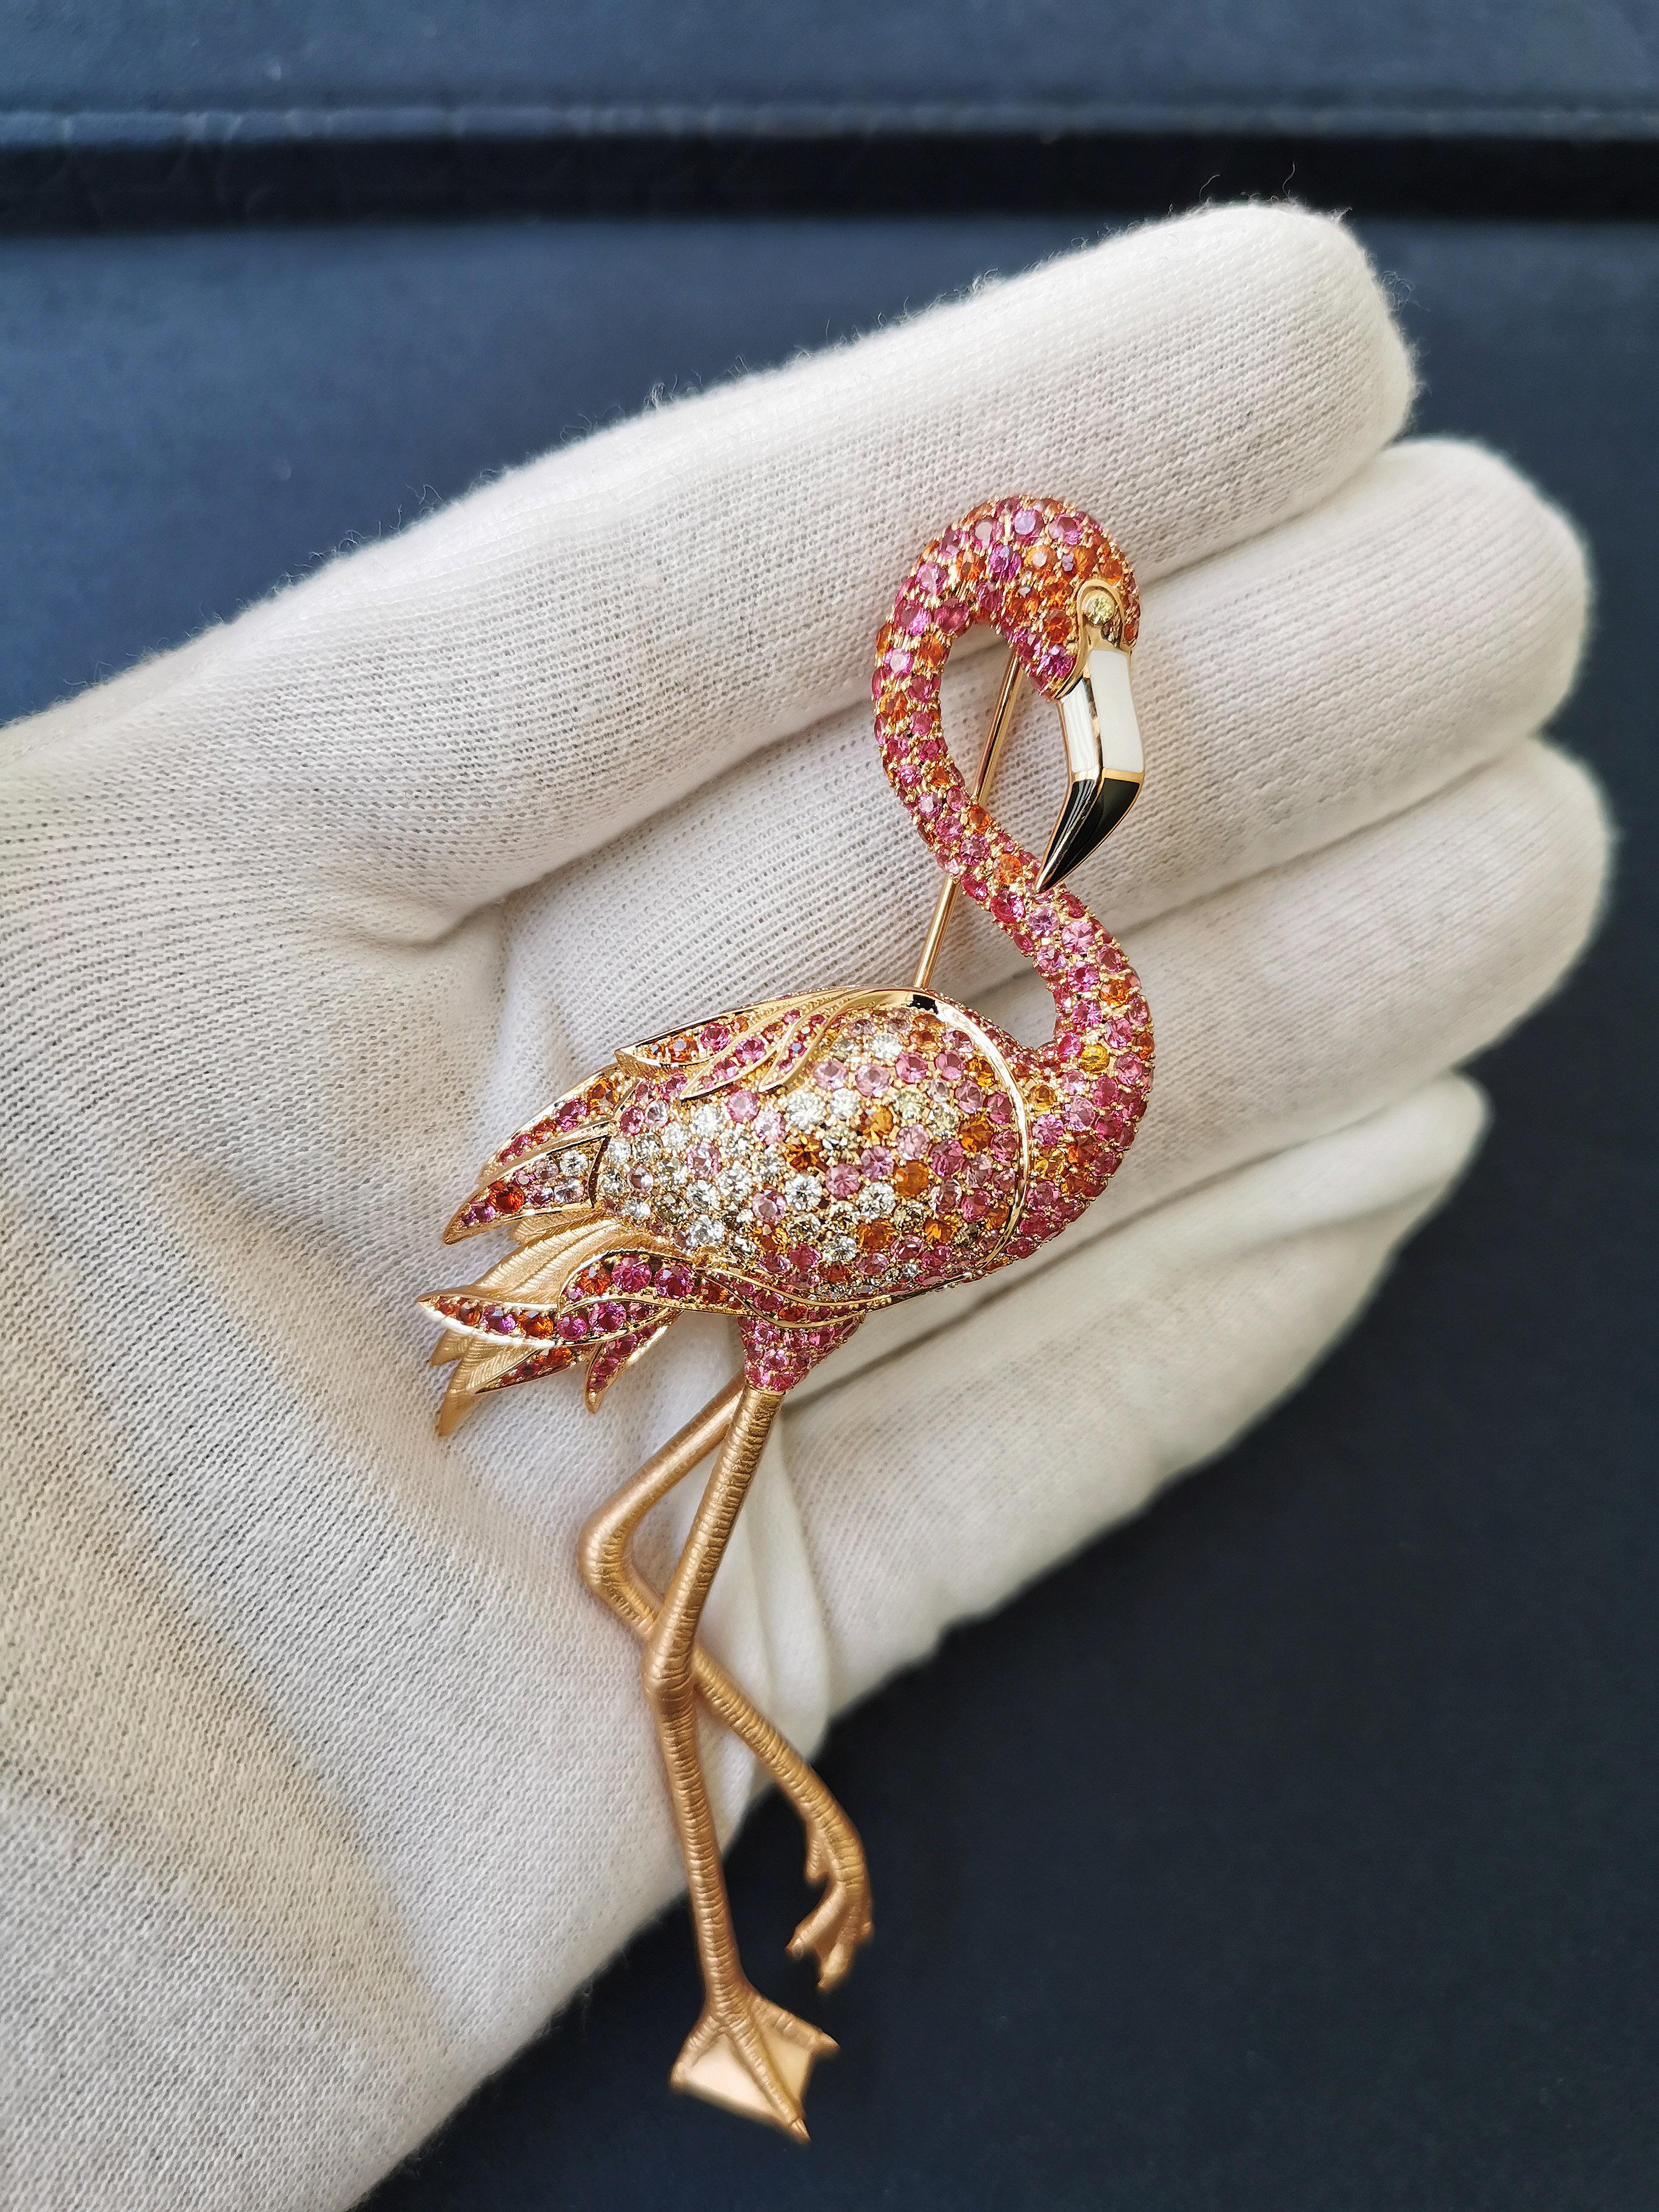 Diamonds Pink Orange Sapphires Enamel 18 Karat Rose Gold Flamingo Brooch
We decided to represent one of the most beautiful birds on earth - flamingos. The bird is made of 18 Karat Rose Gold. The legs are made so realistic that every wrinkle and claw